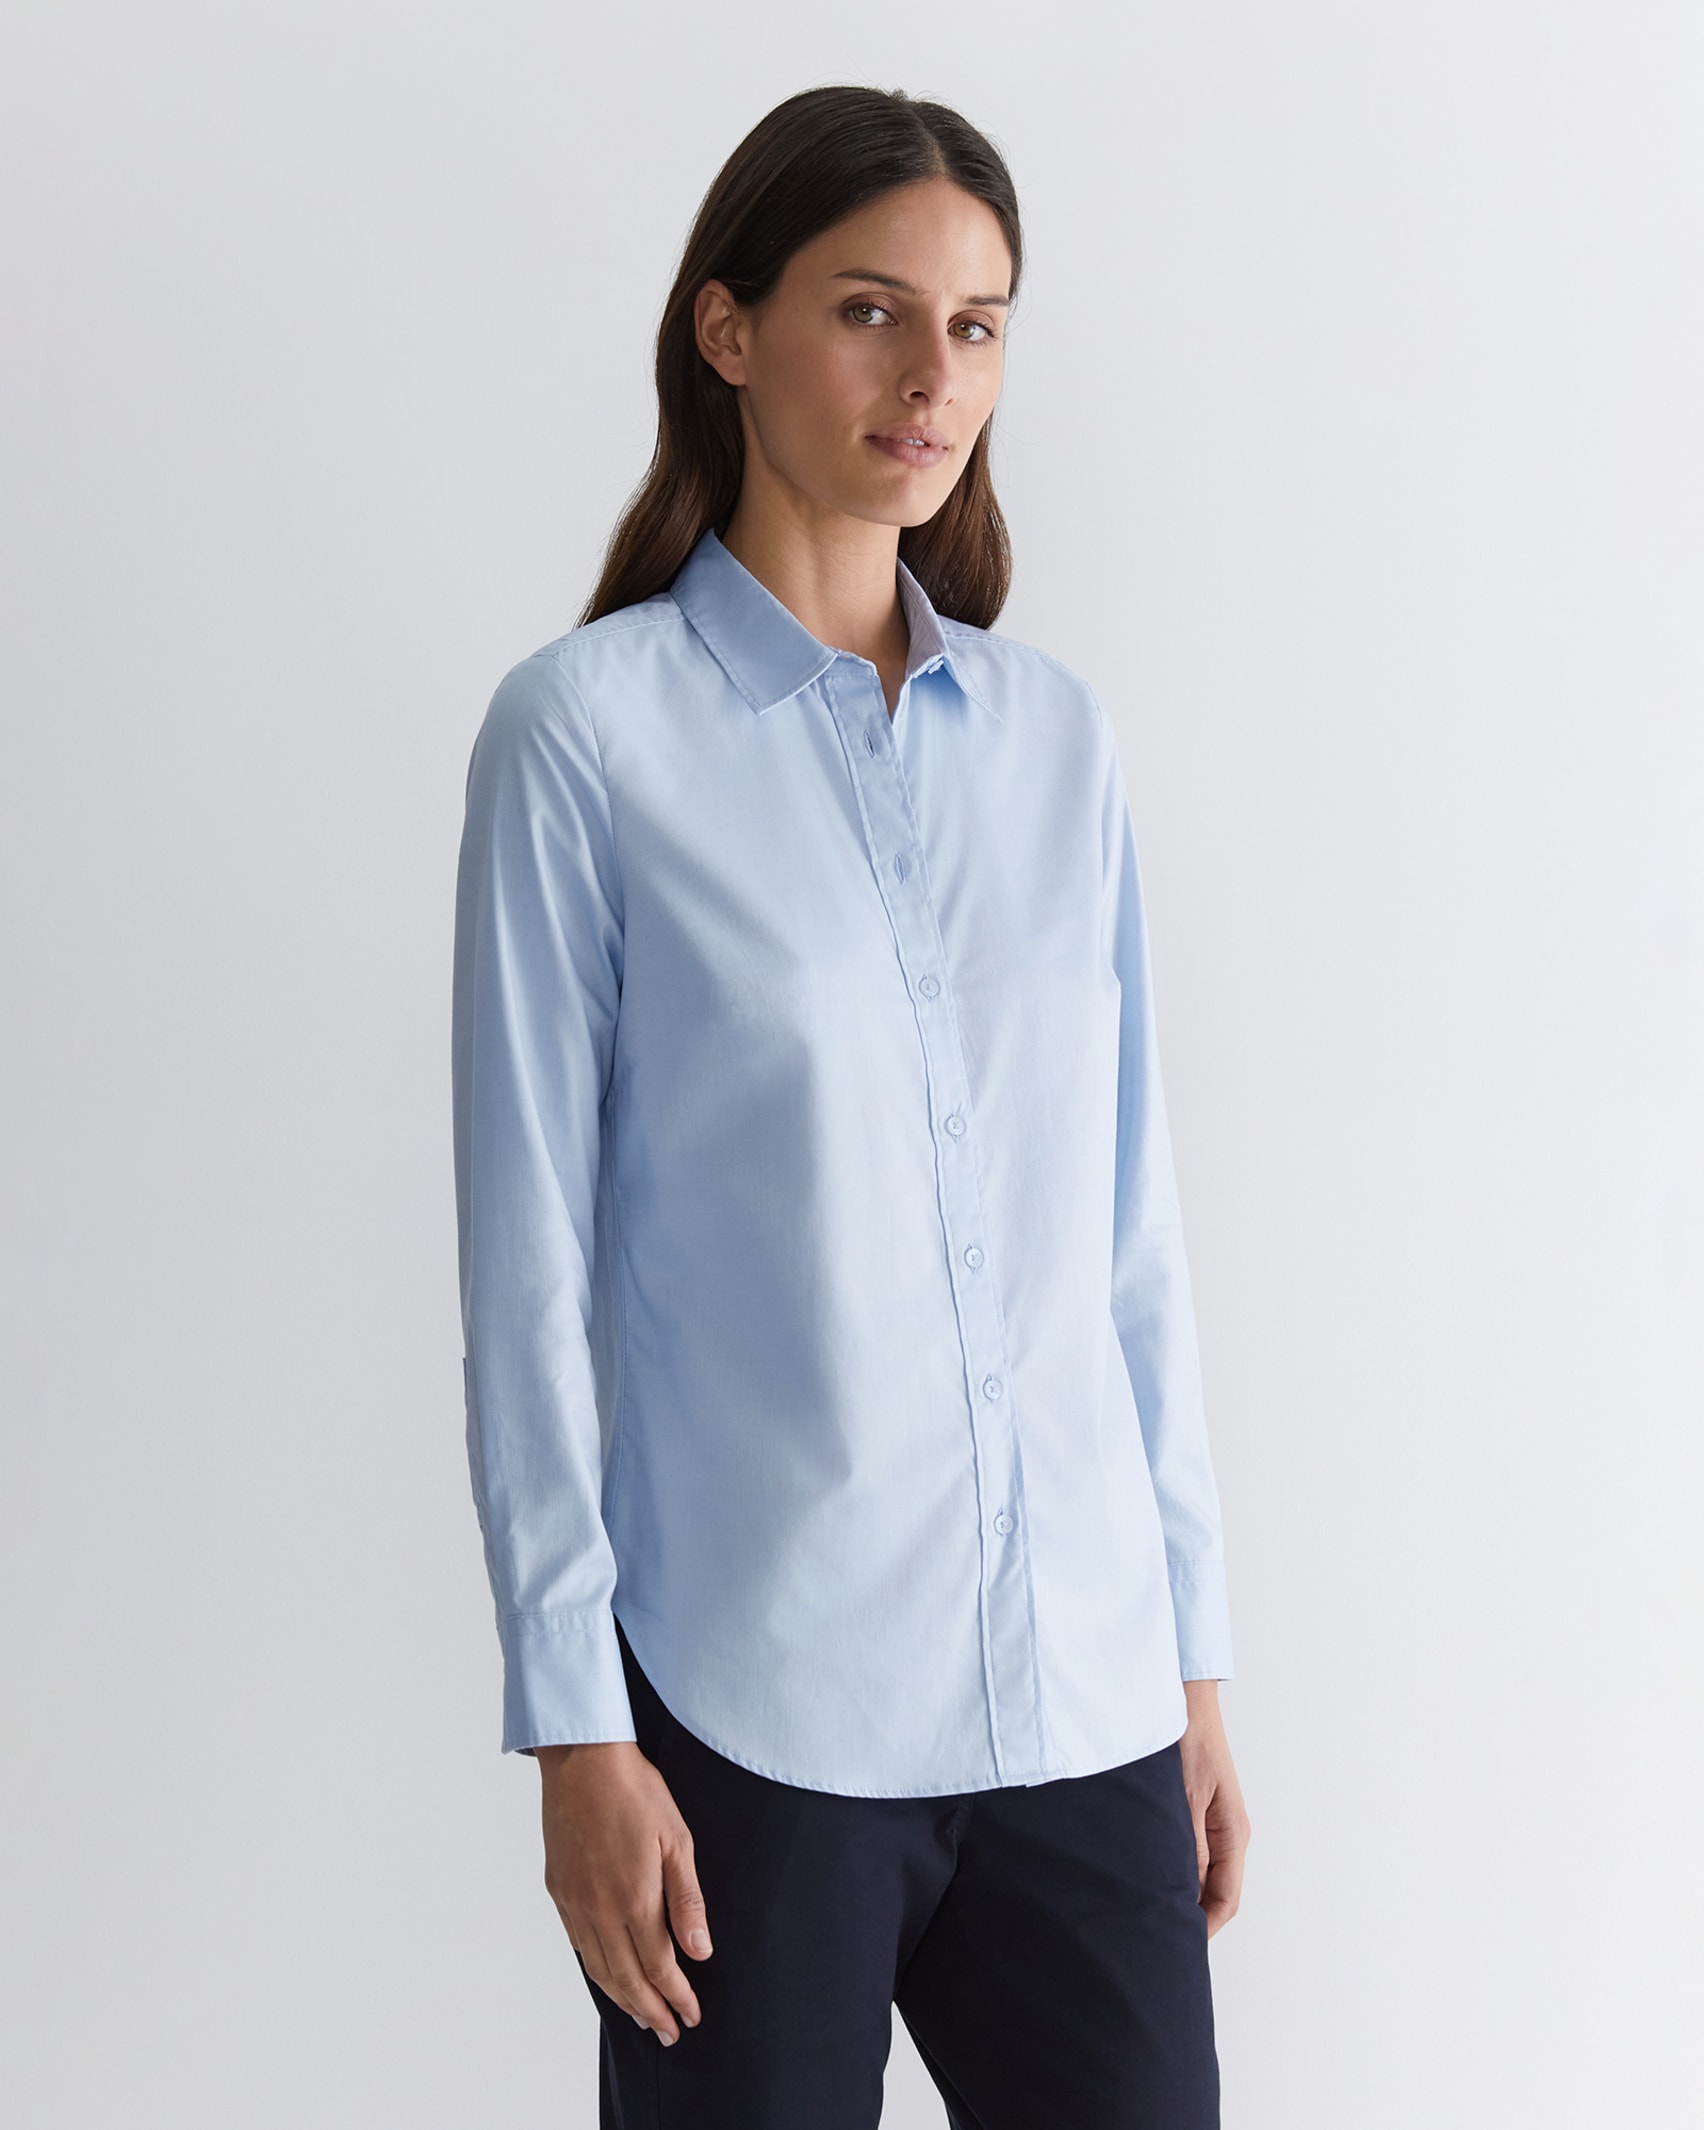 Emily Oxford Shirt in BLUE